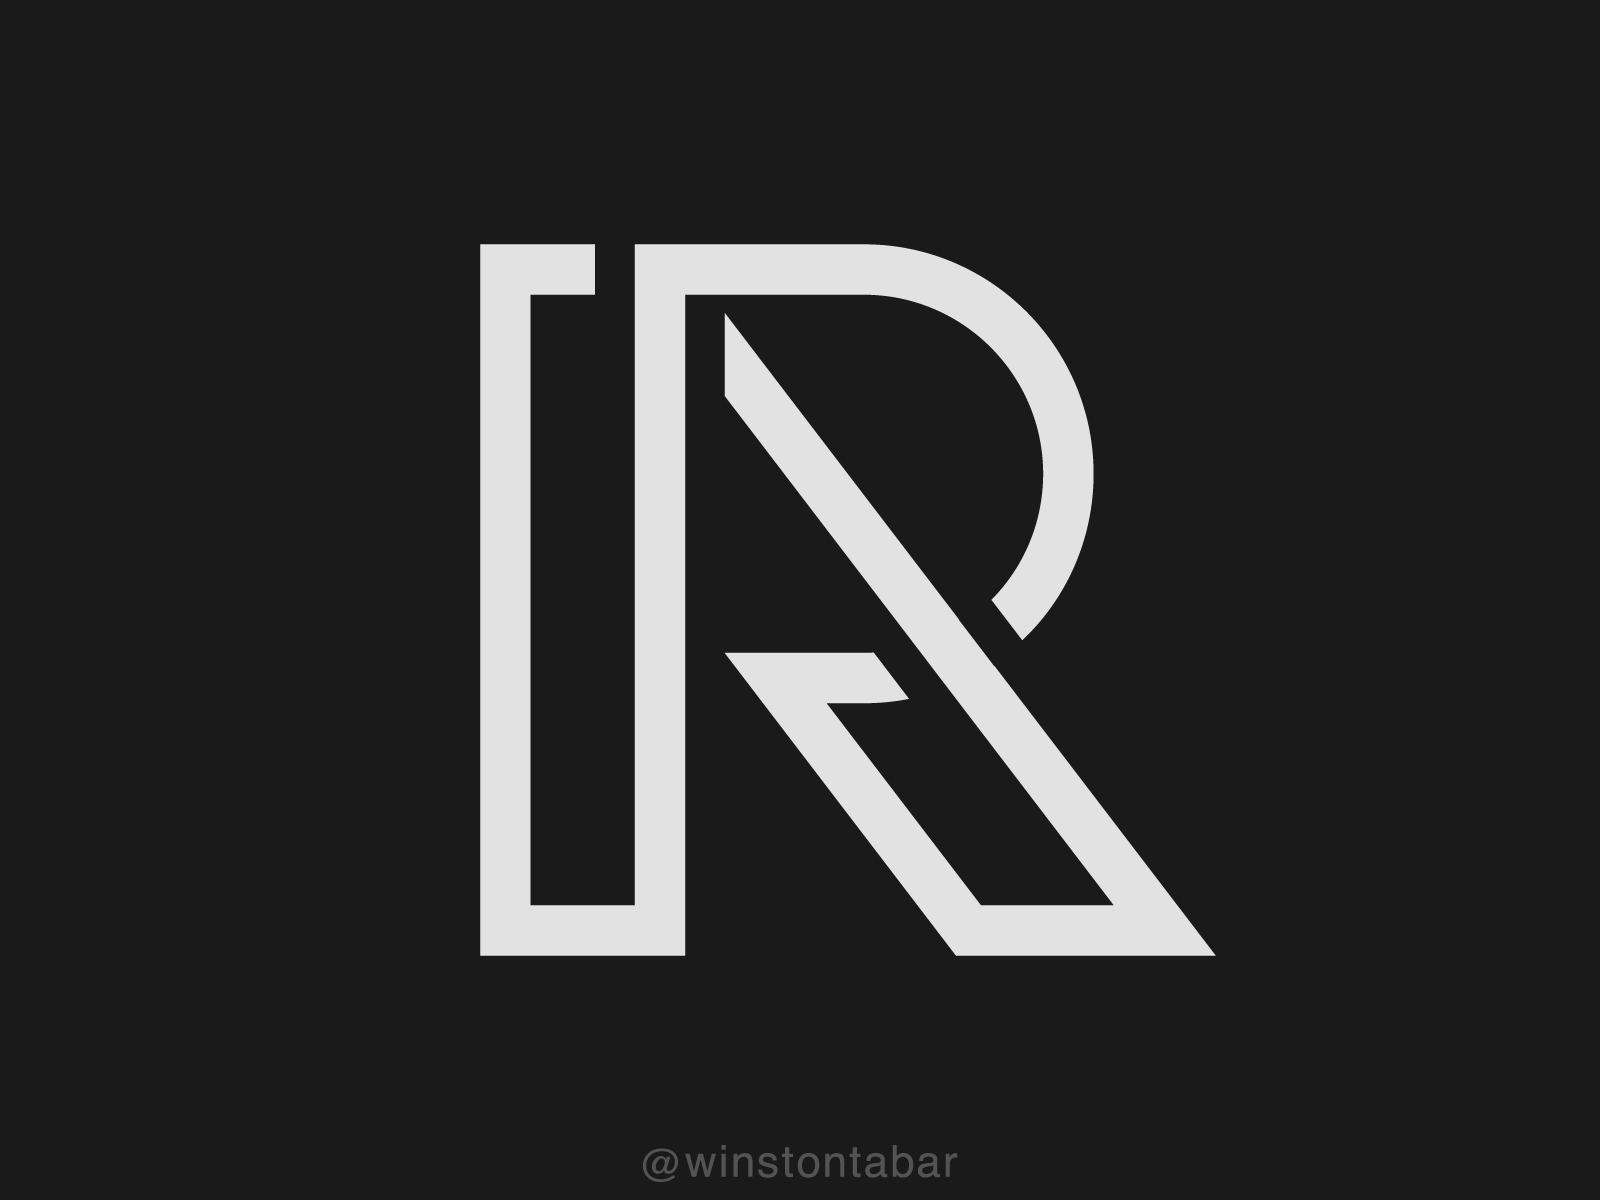 R by Winston Tabar on Dribbble